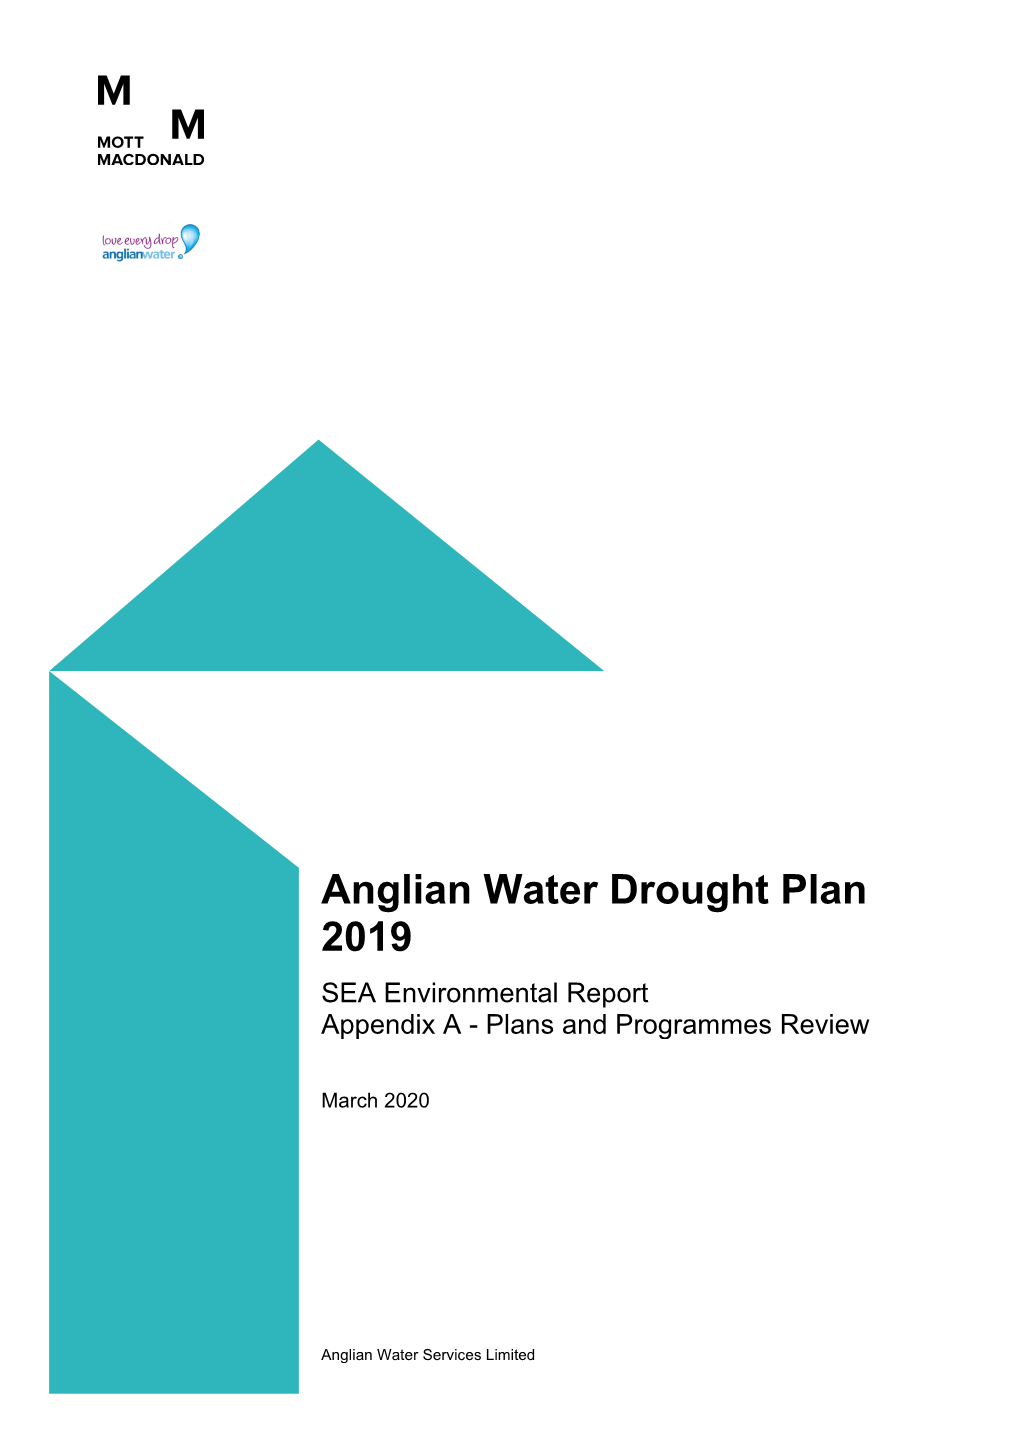 Anglian Water Drought Plan 2019 SEA Environmental Report Appendix a - Plans and Programmes Review